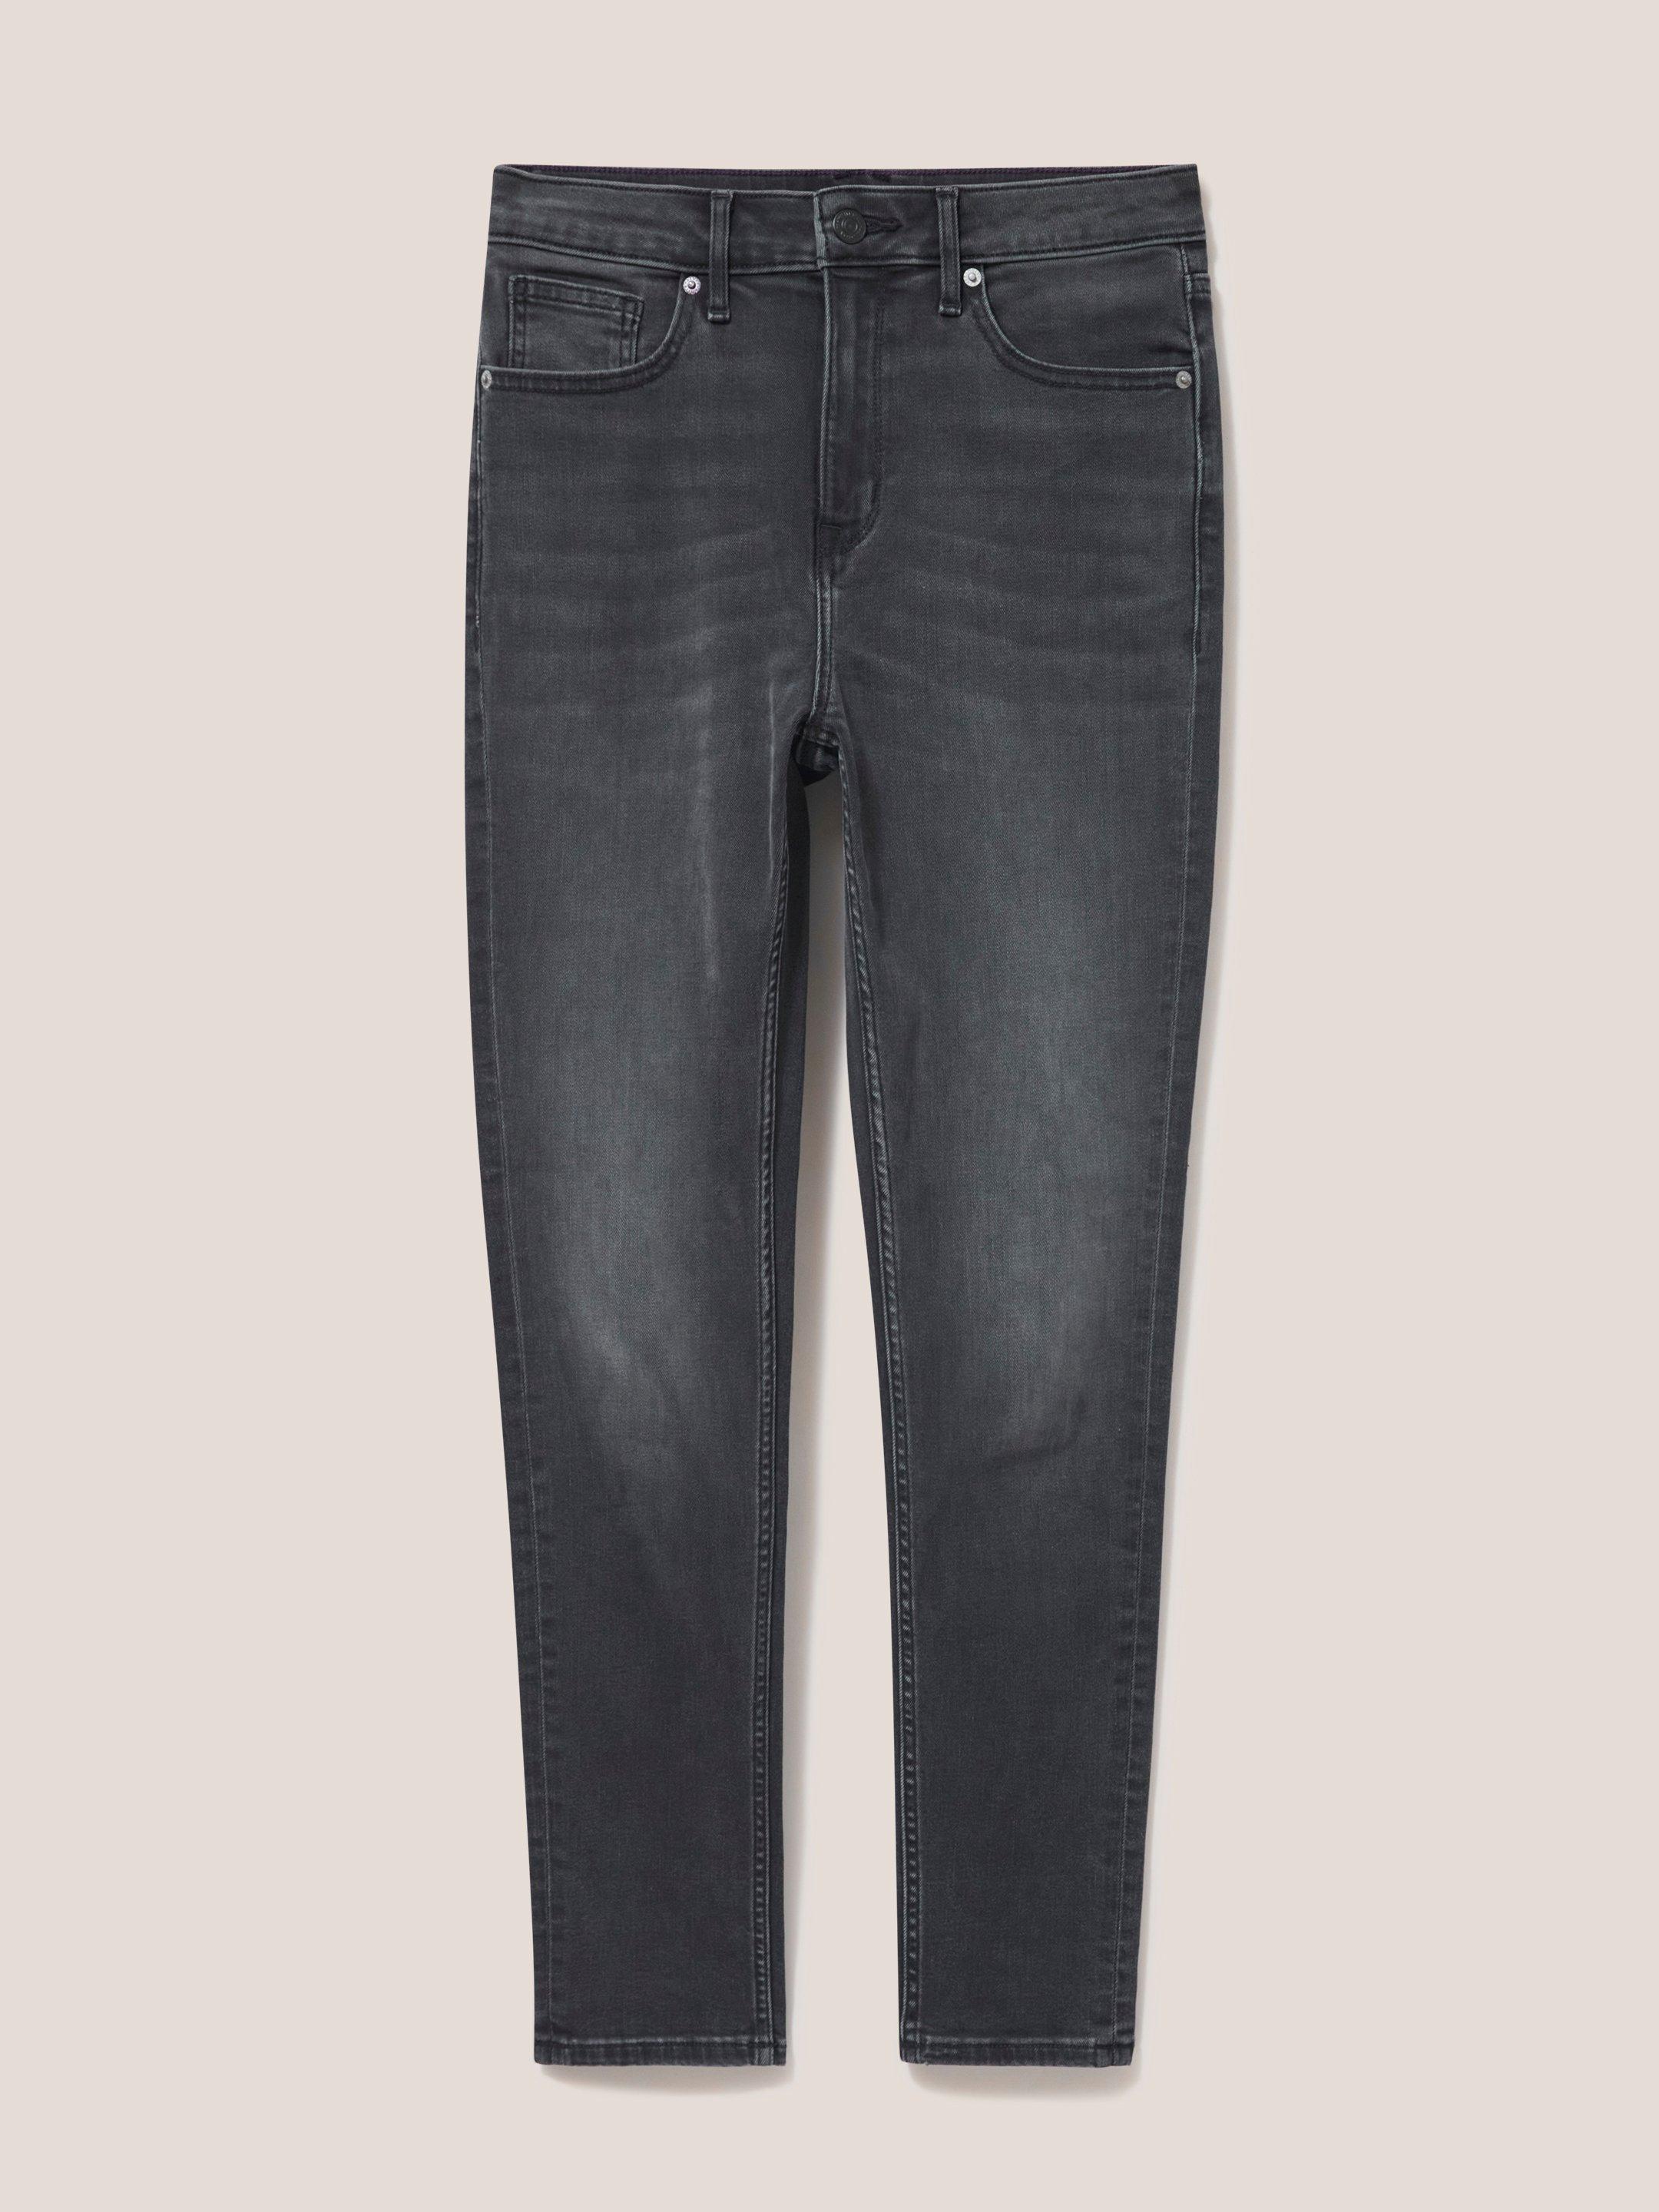 Amelia Skinny Leg Jeans in CHARC GREY - FLAT FRONT